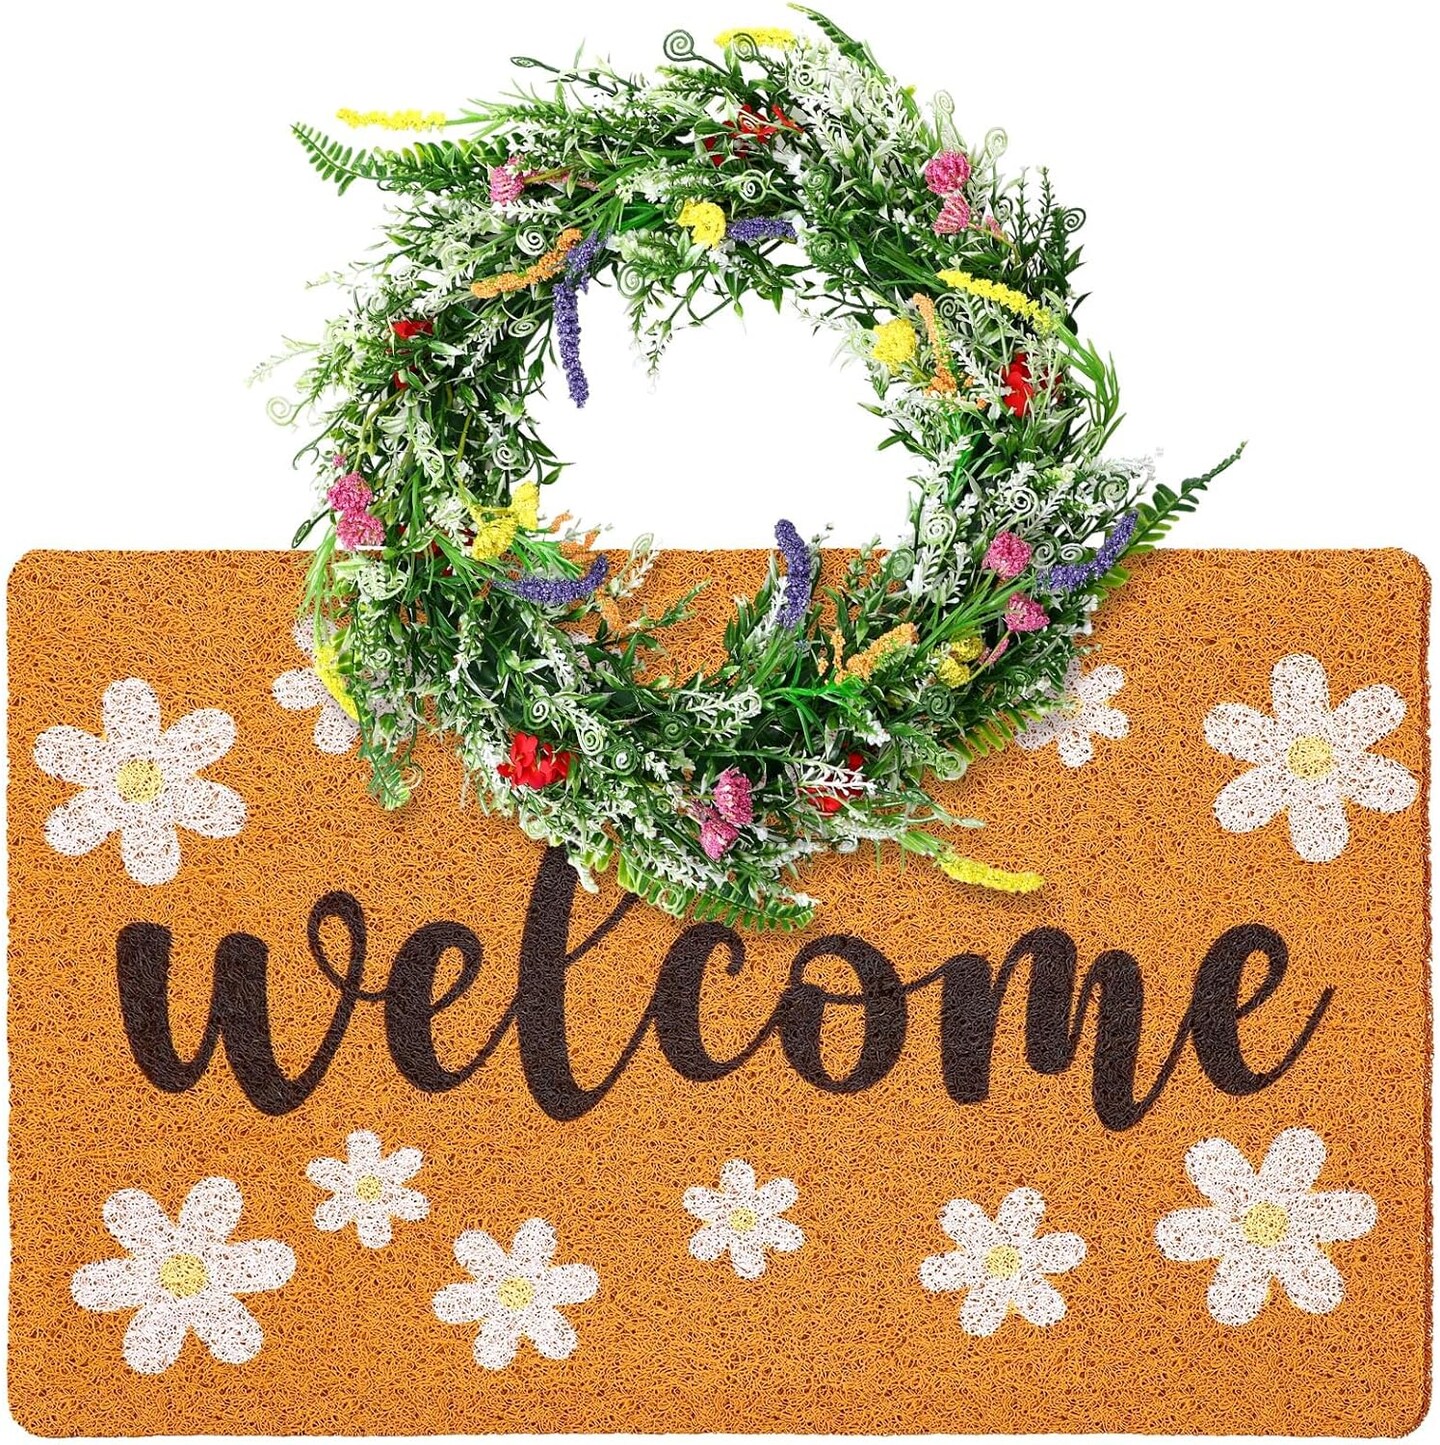 Spring Floral Welcome: Doormat and Wreath Set for a Cheerful Home Entrance